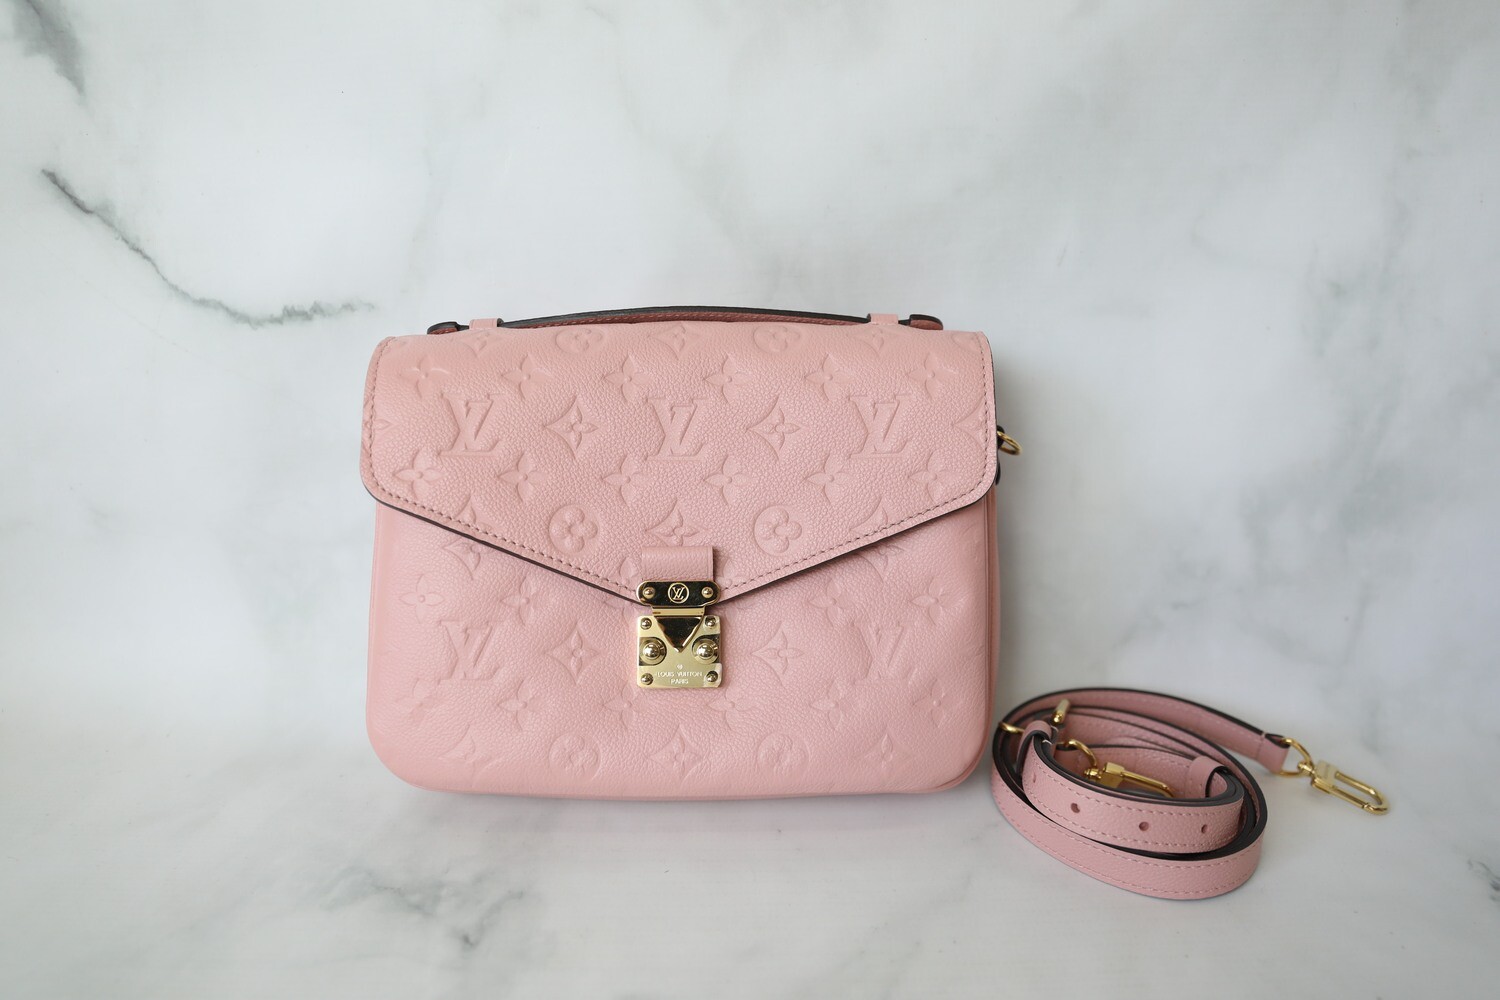 New Louis Vuitton Micro Pochette Metis in empreinte leather - LV so cute in  pink, yellow & taupe 